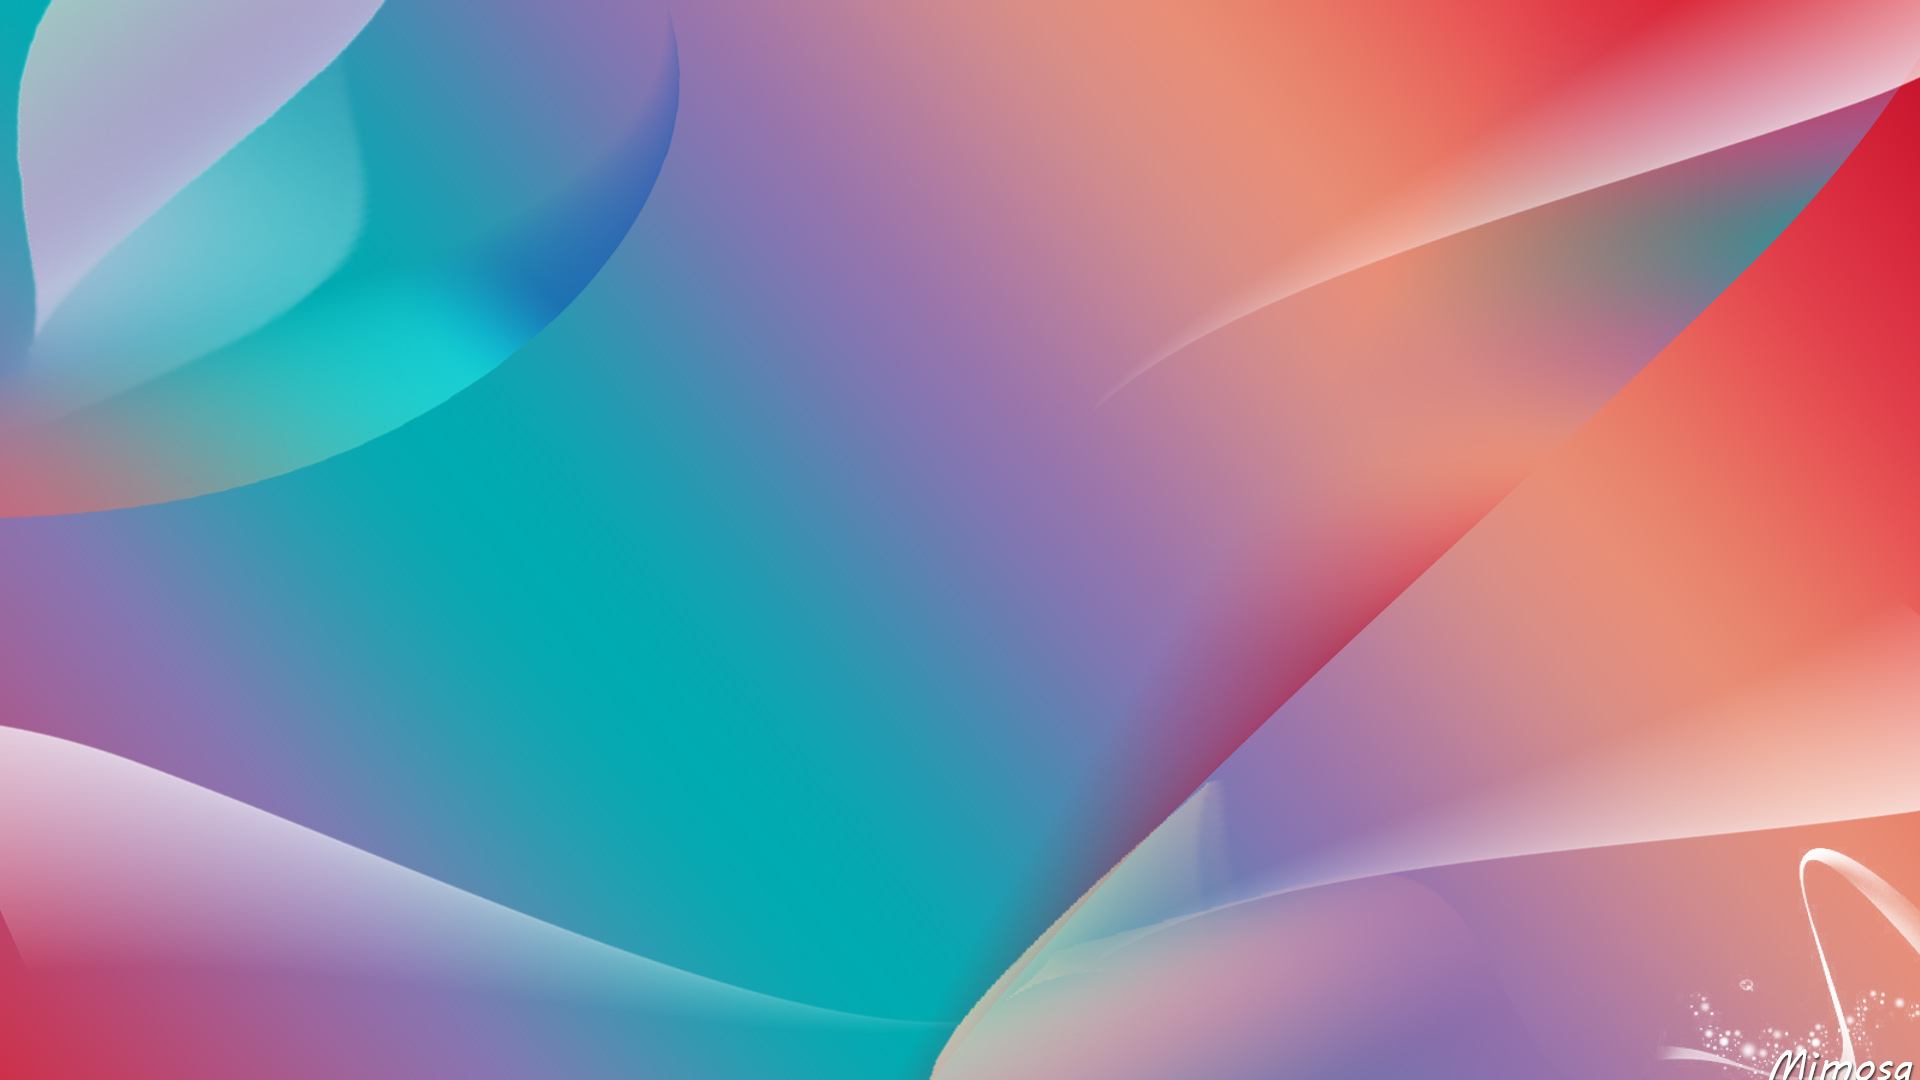 190+ Gradient HD Wallpapers and Backgrounds